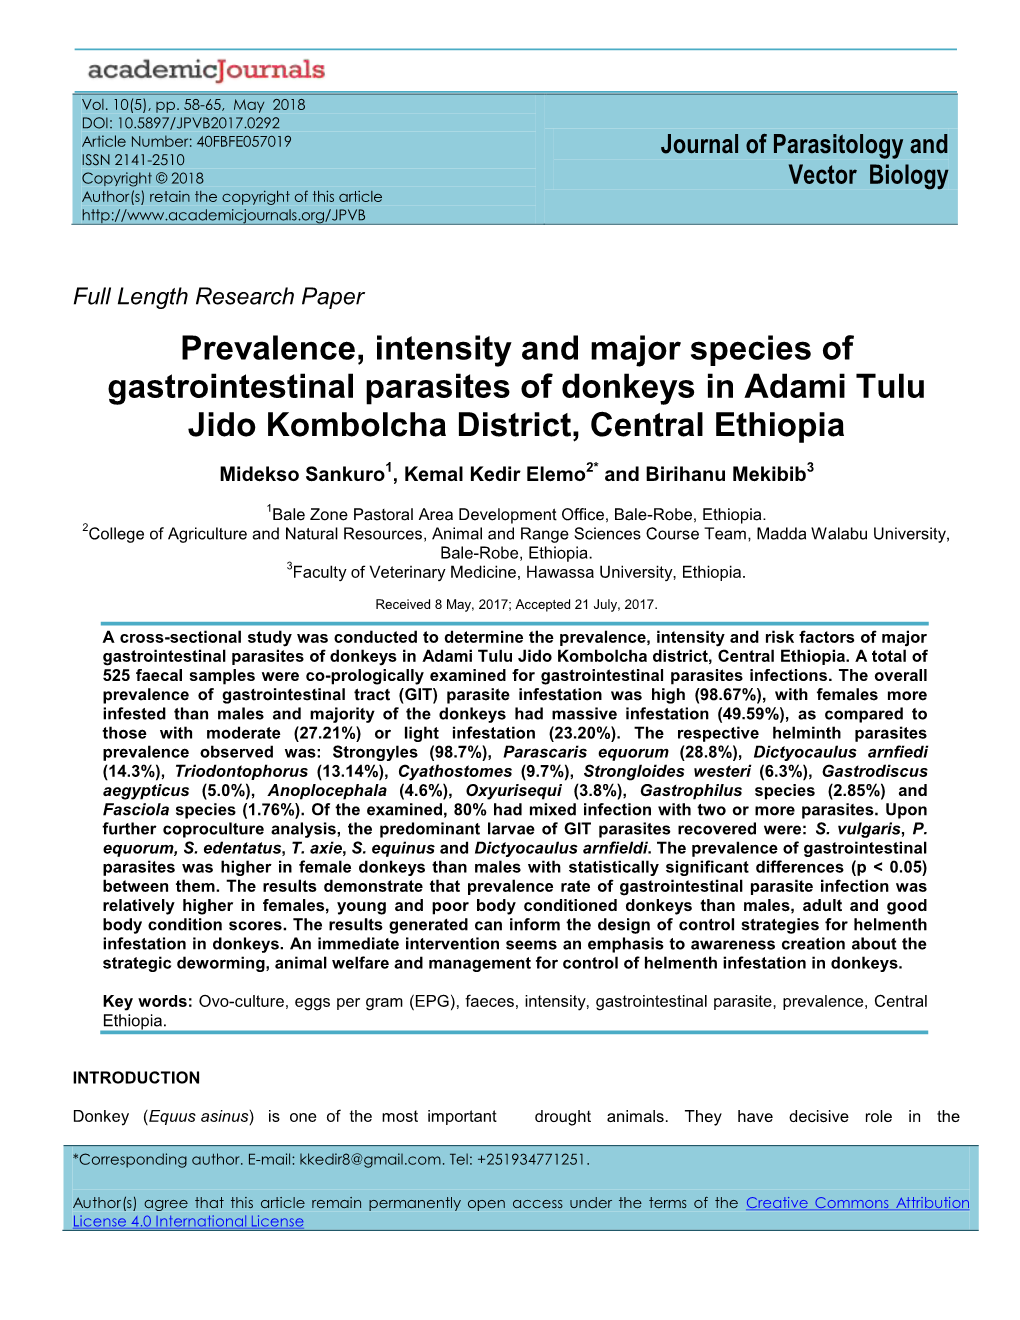 Prevalence, Intensity and Major Species of Gastrointestinal Parasites of Donkeys in Adami Tulu Jido Kombolcha District, Central Ethiopia